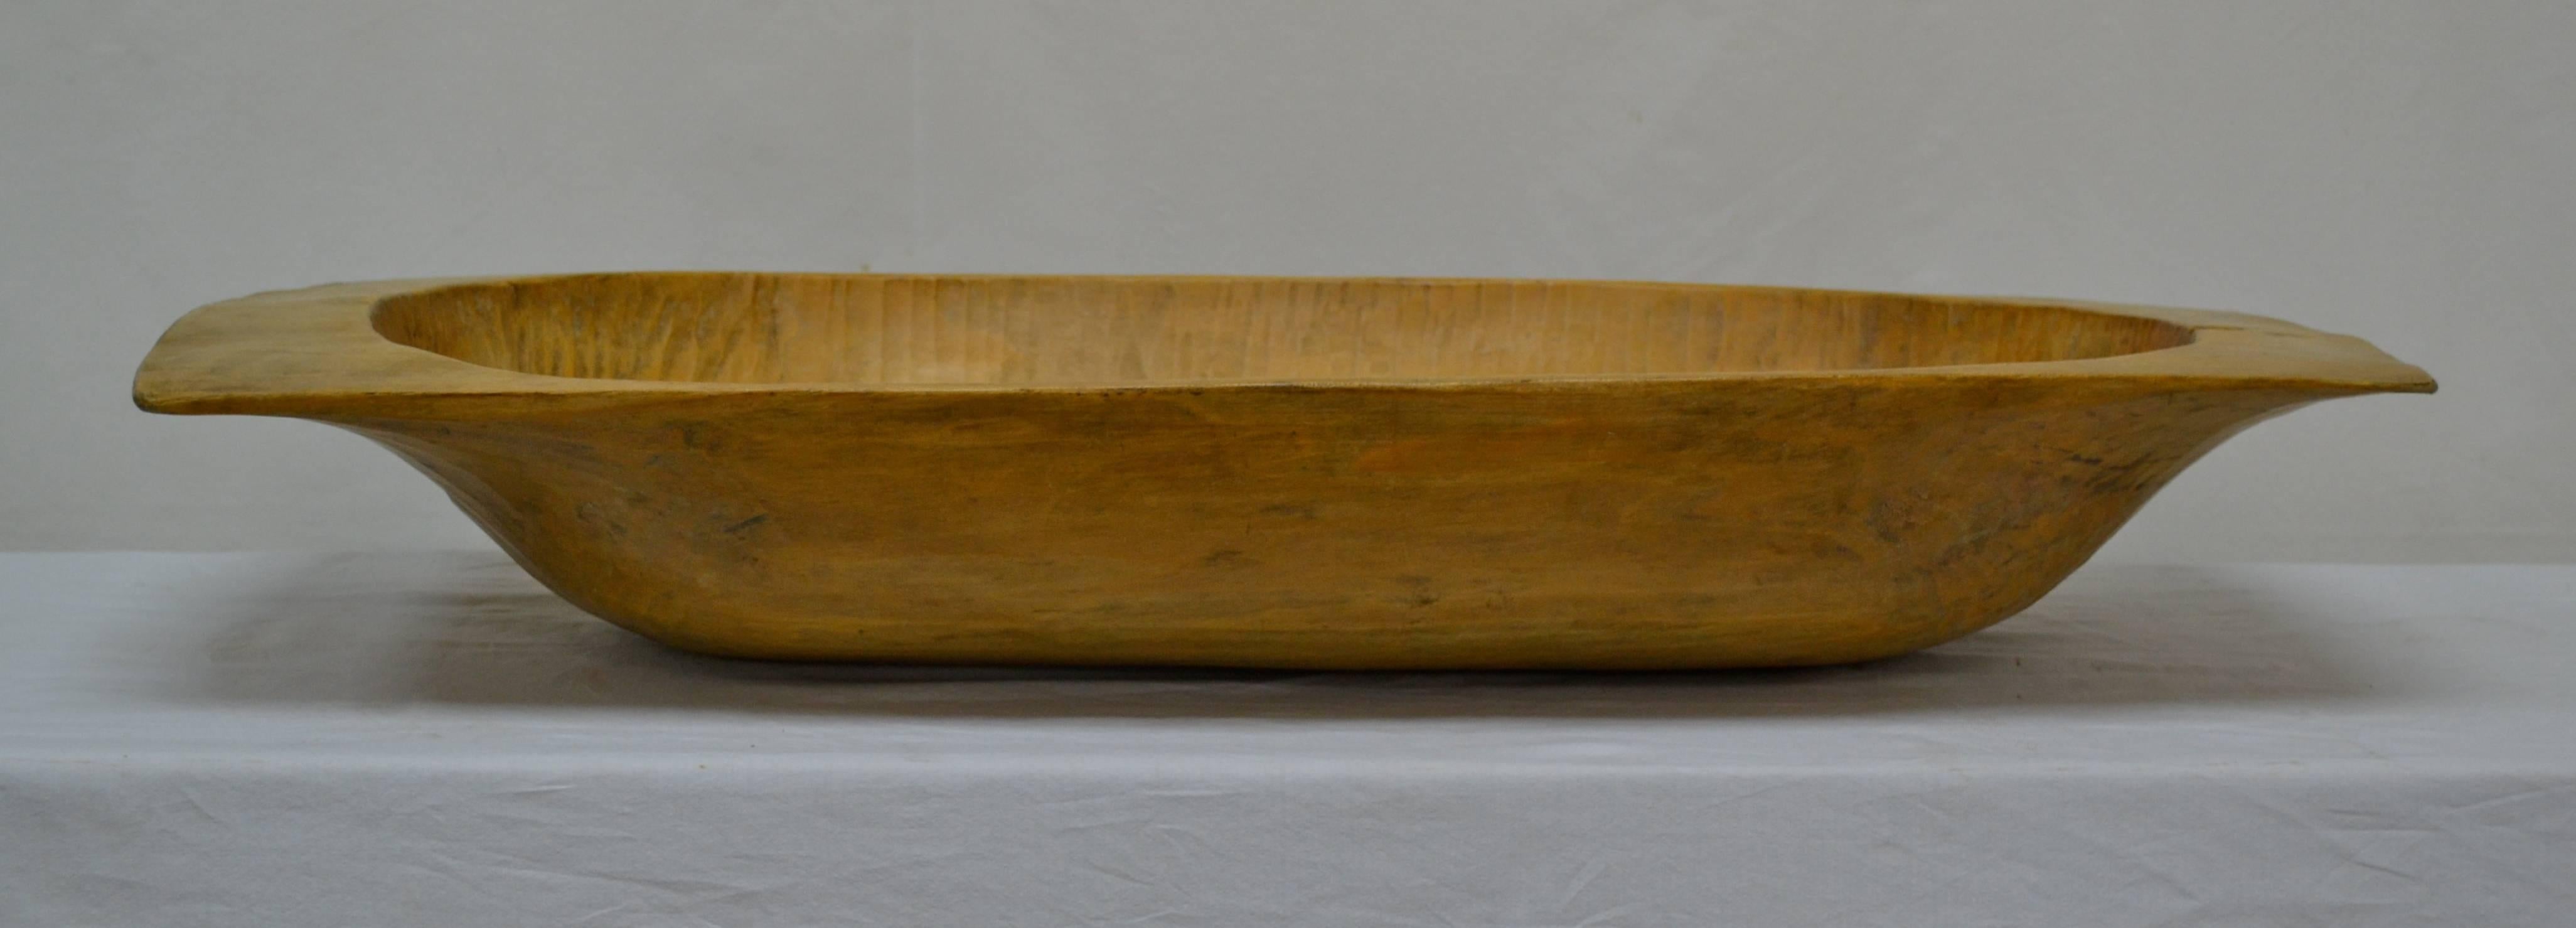 An antique wooden dough bowl or trog, hand-carved from a split log.  This one is a very versatile small size with one or two superficial cracks and a warm honey colour.  Great as a centerpiece or as a hallway catch-all.  Use for logs or magazines by